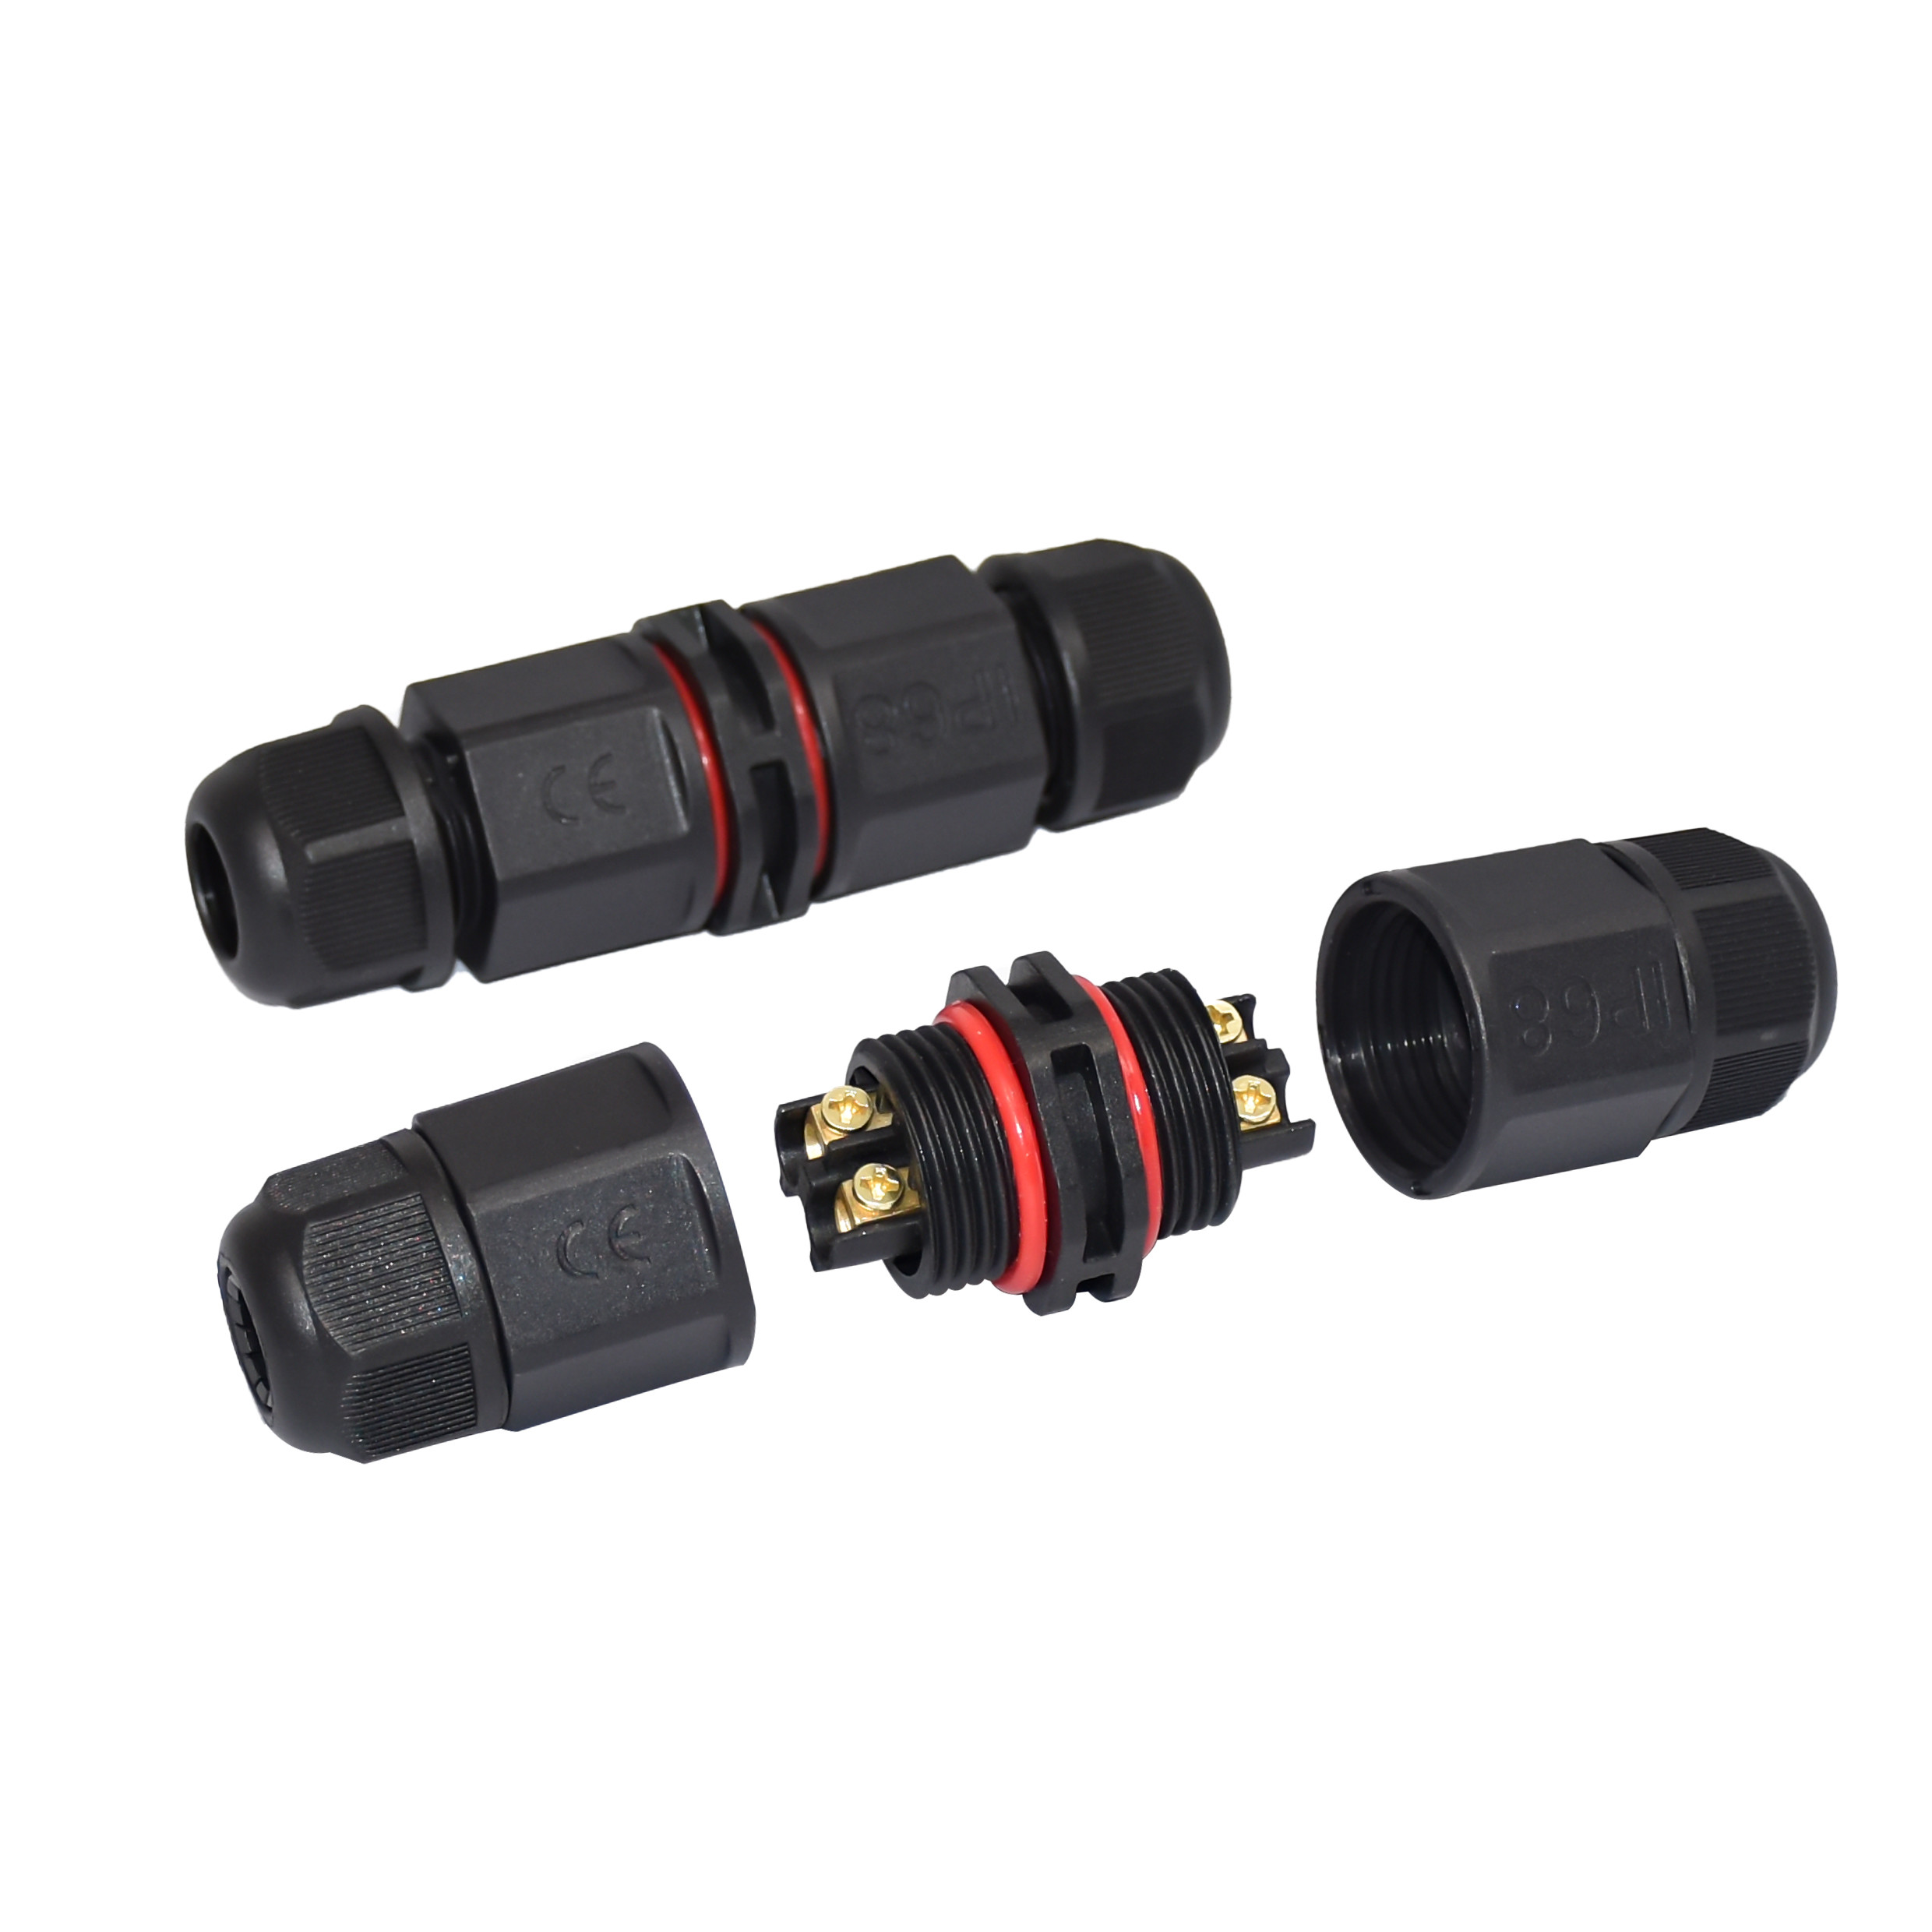 Quality IP68 Rubber AC DC M20 2 Pin Waterproof Connector For LED Module & Driver for sale